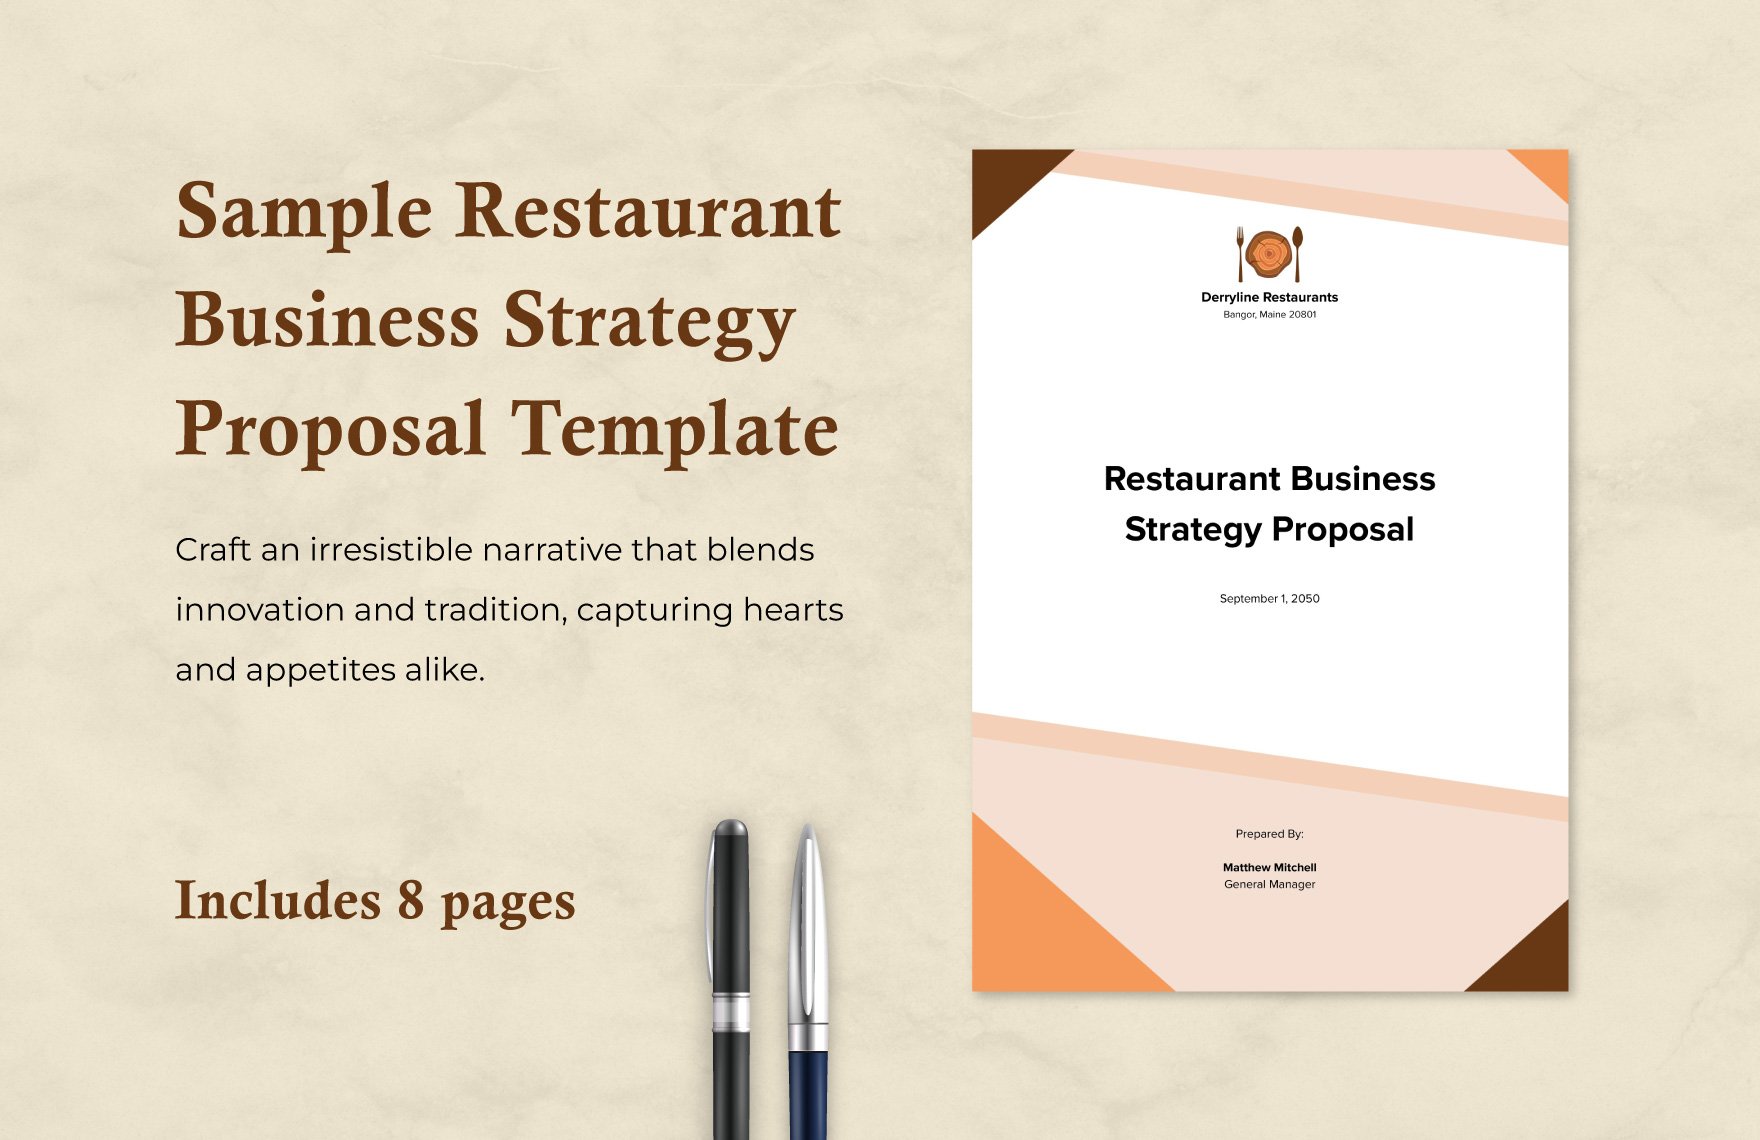 Sample Restaurant Business Strategy Proposal Template